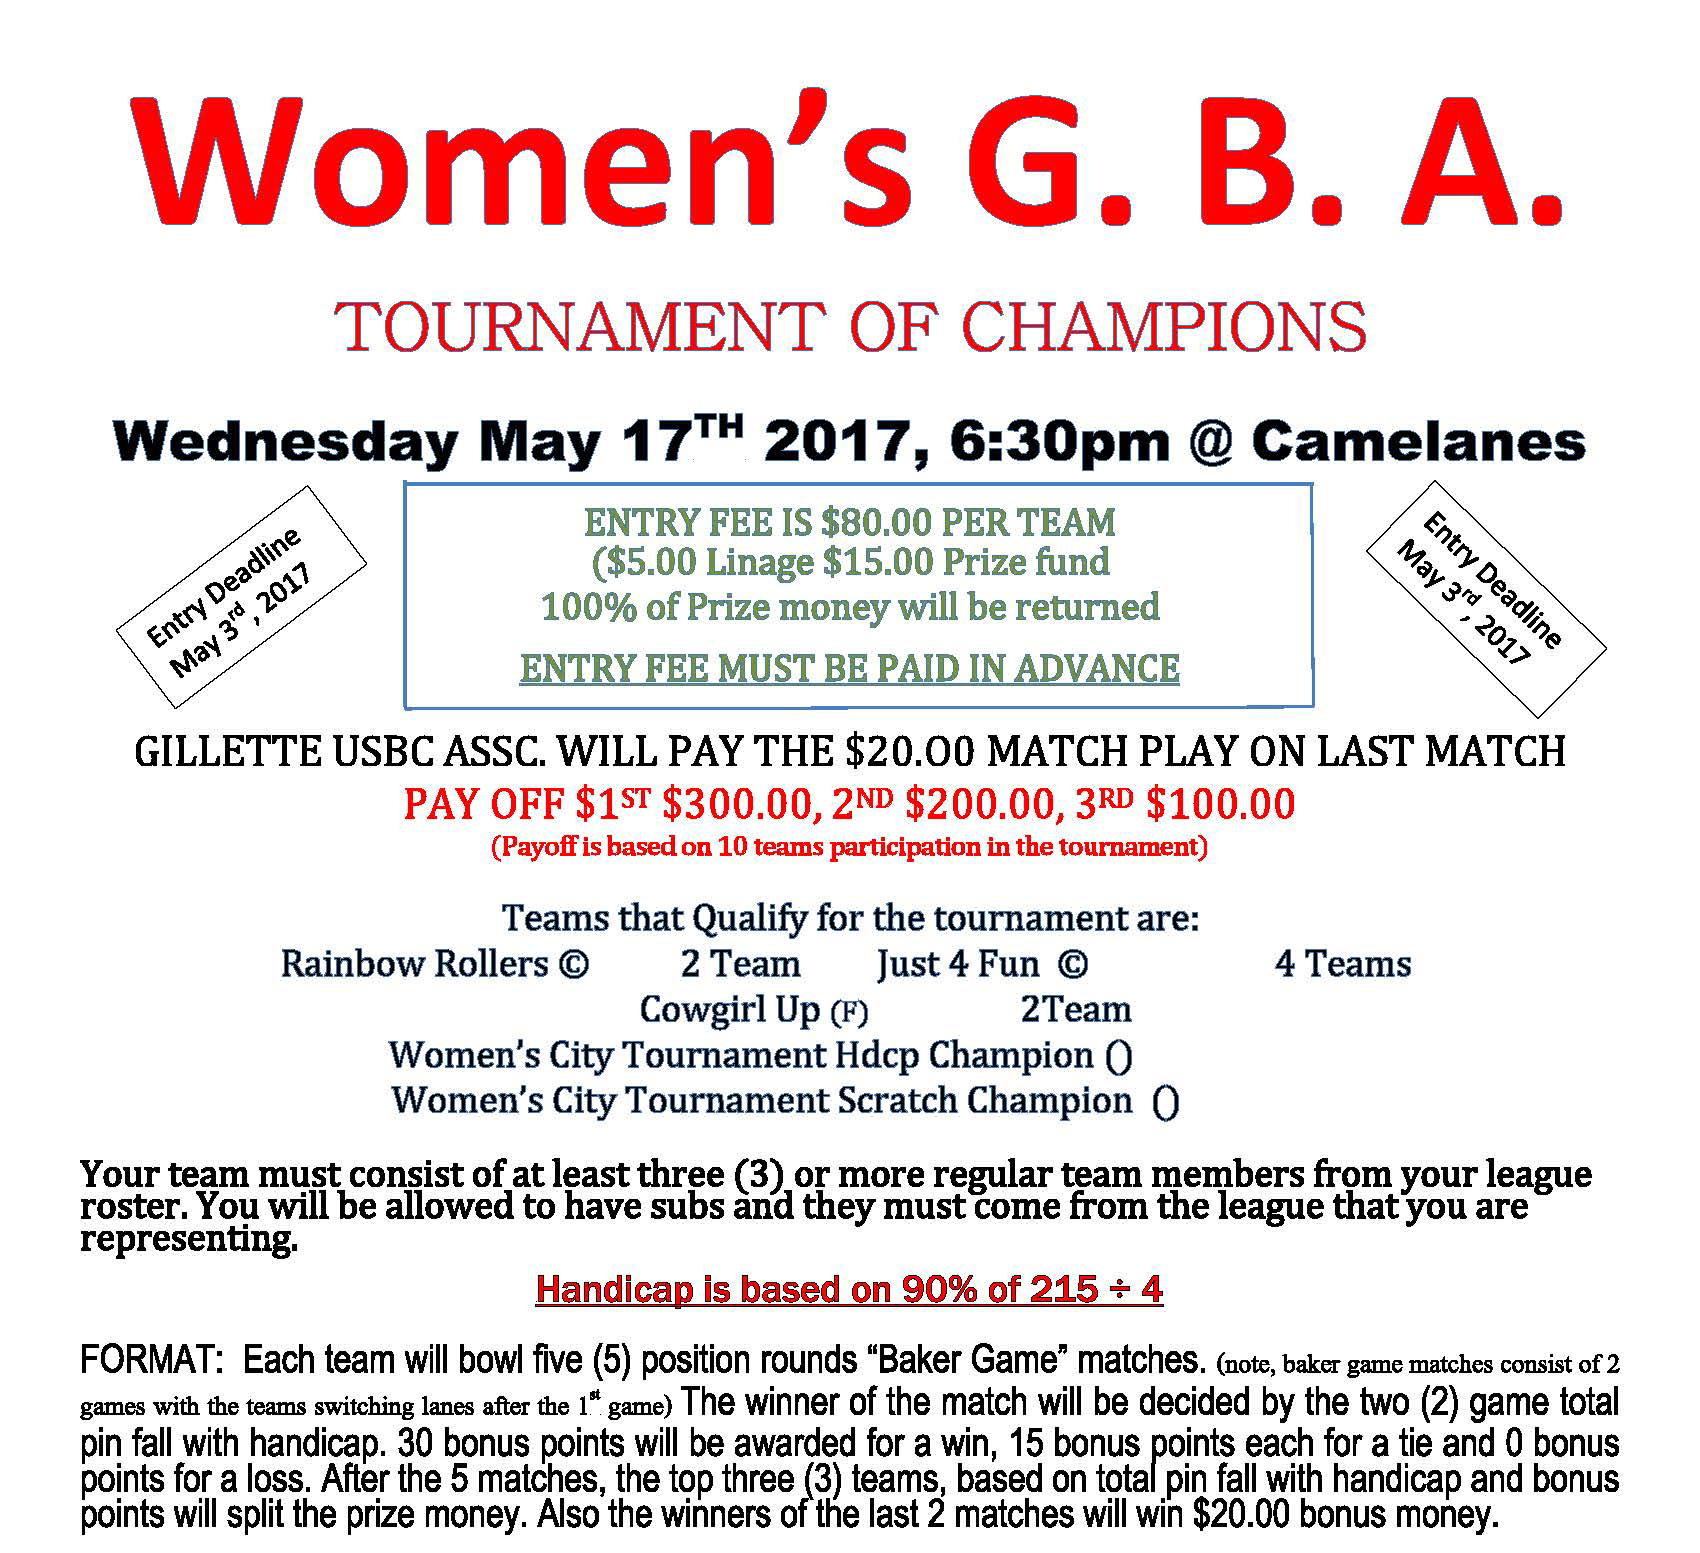 Gillette USBC Mixed Tournament of Champions 2017